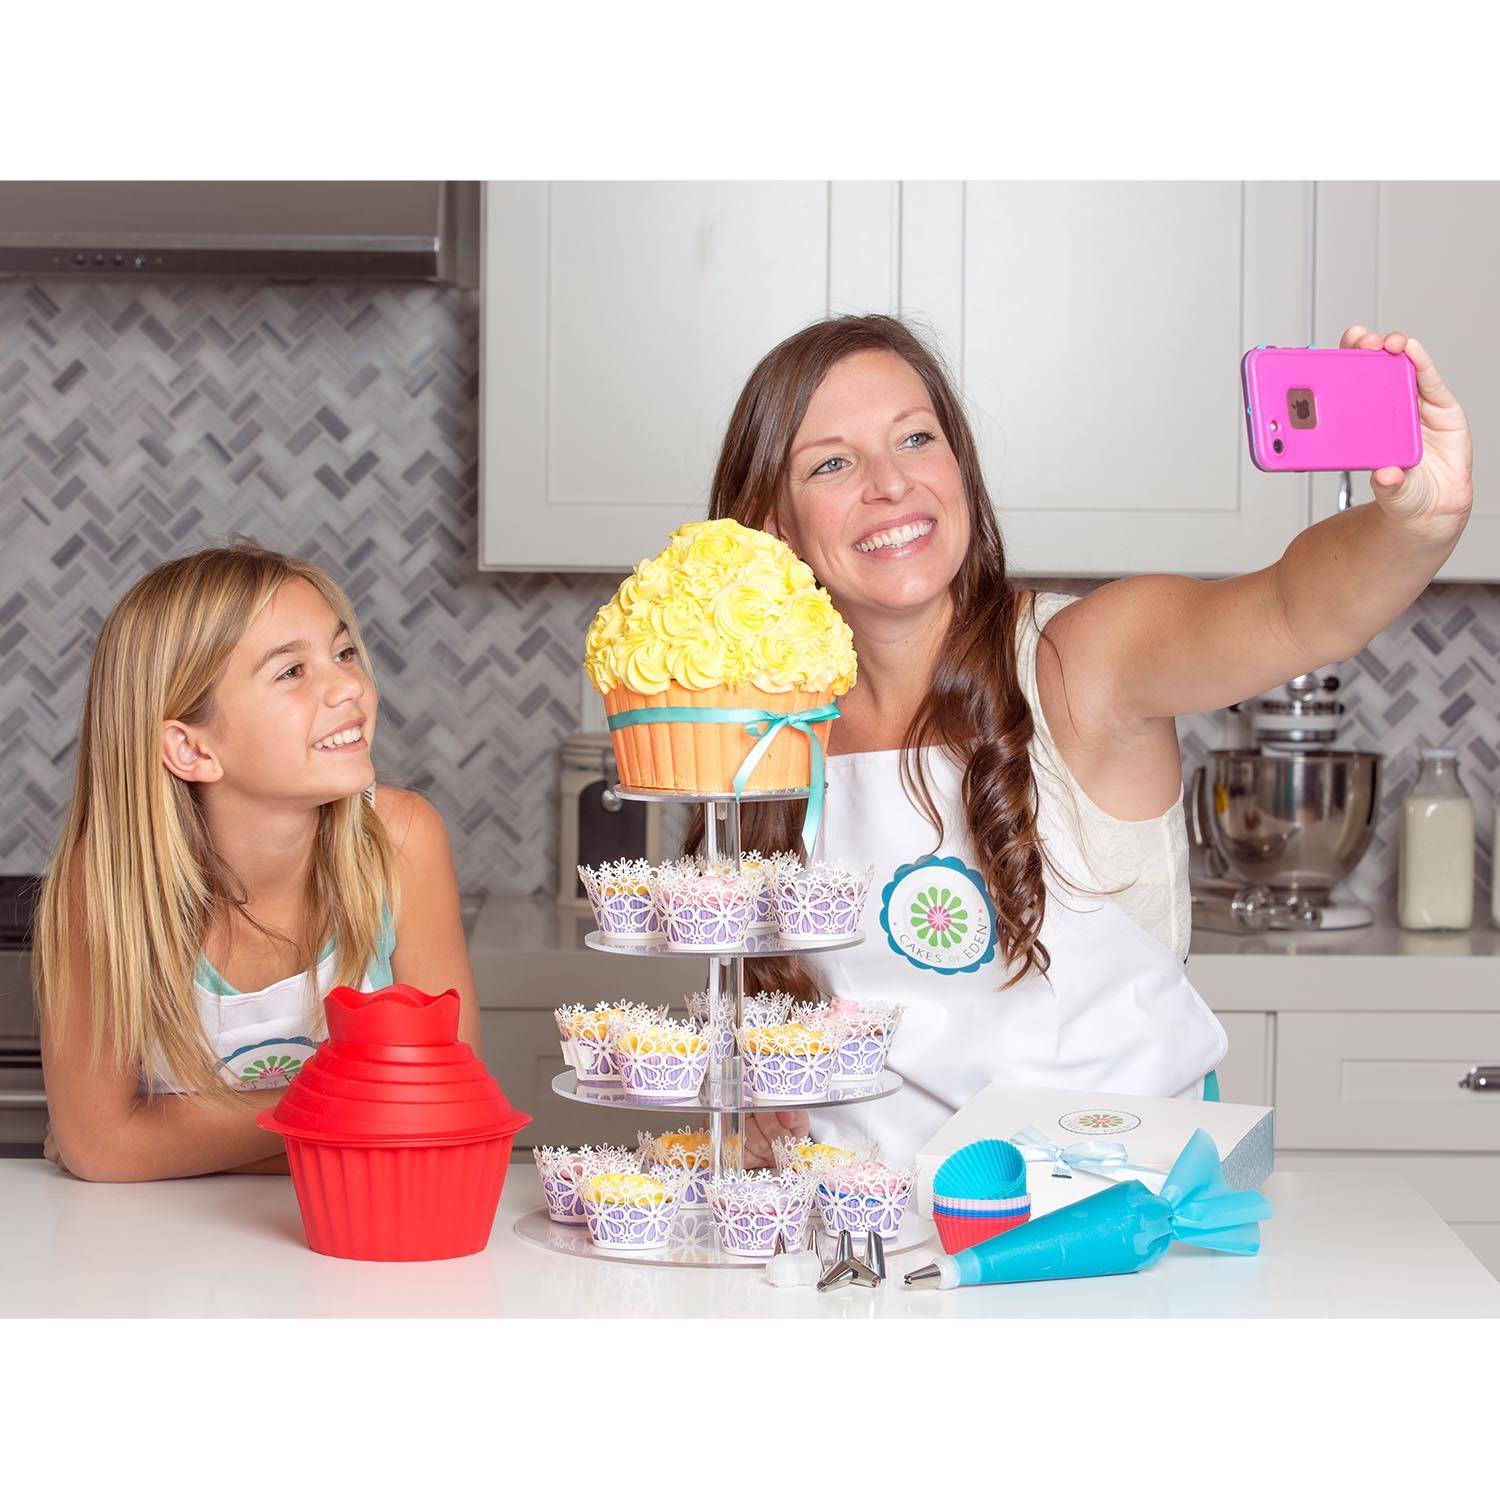 Now Hiring - Bakers + Vloggers!